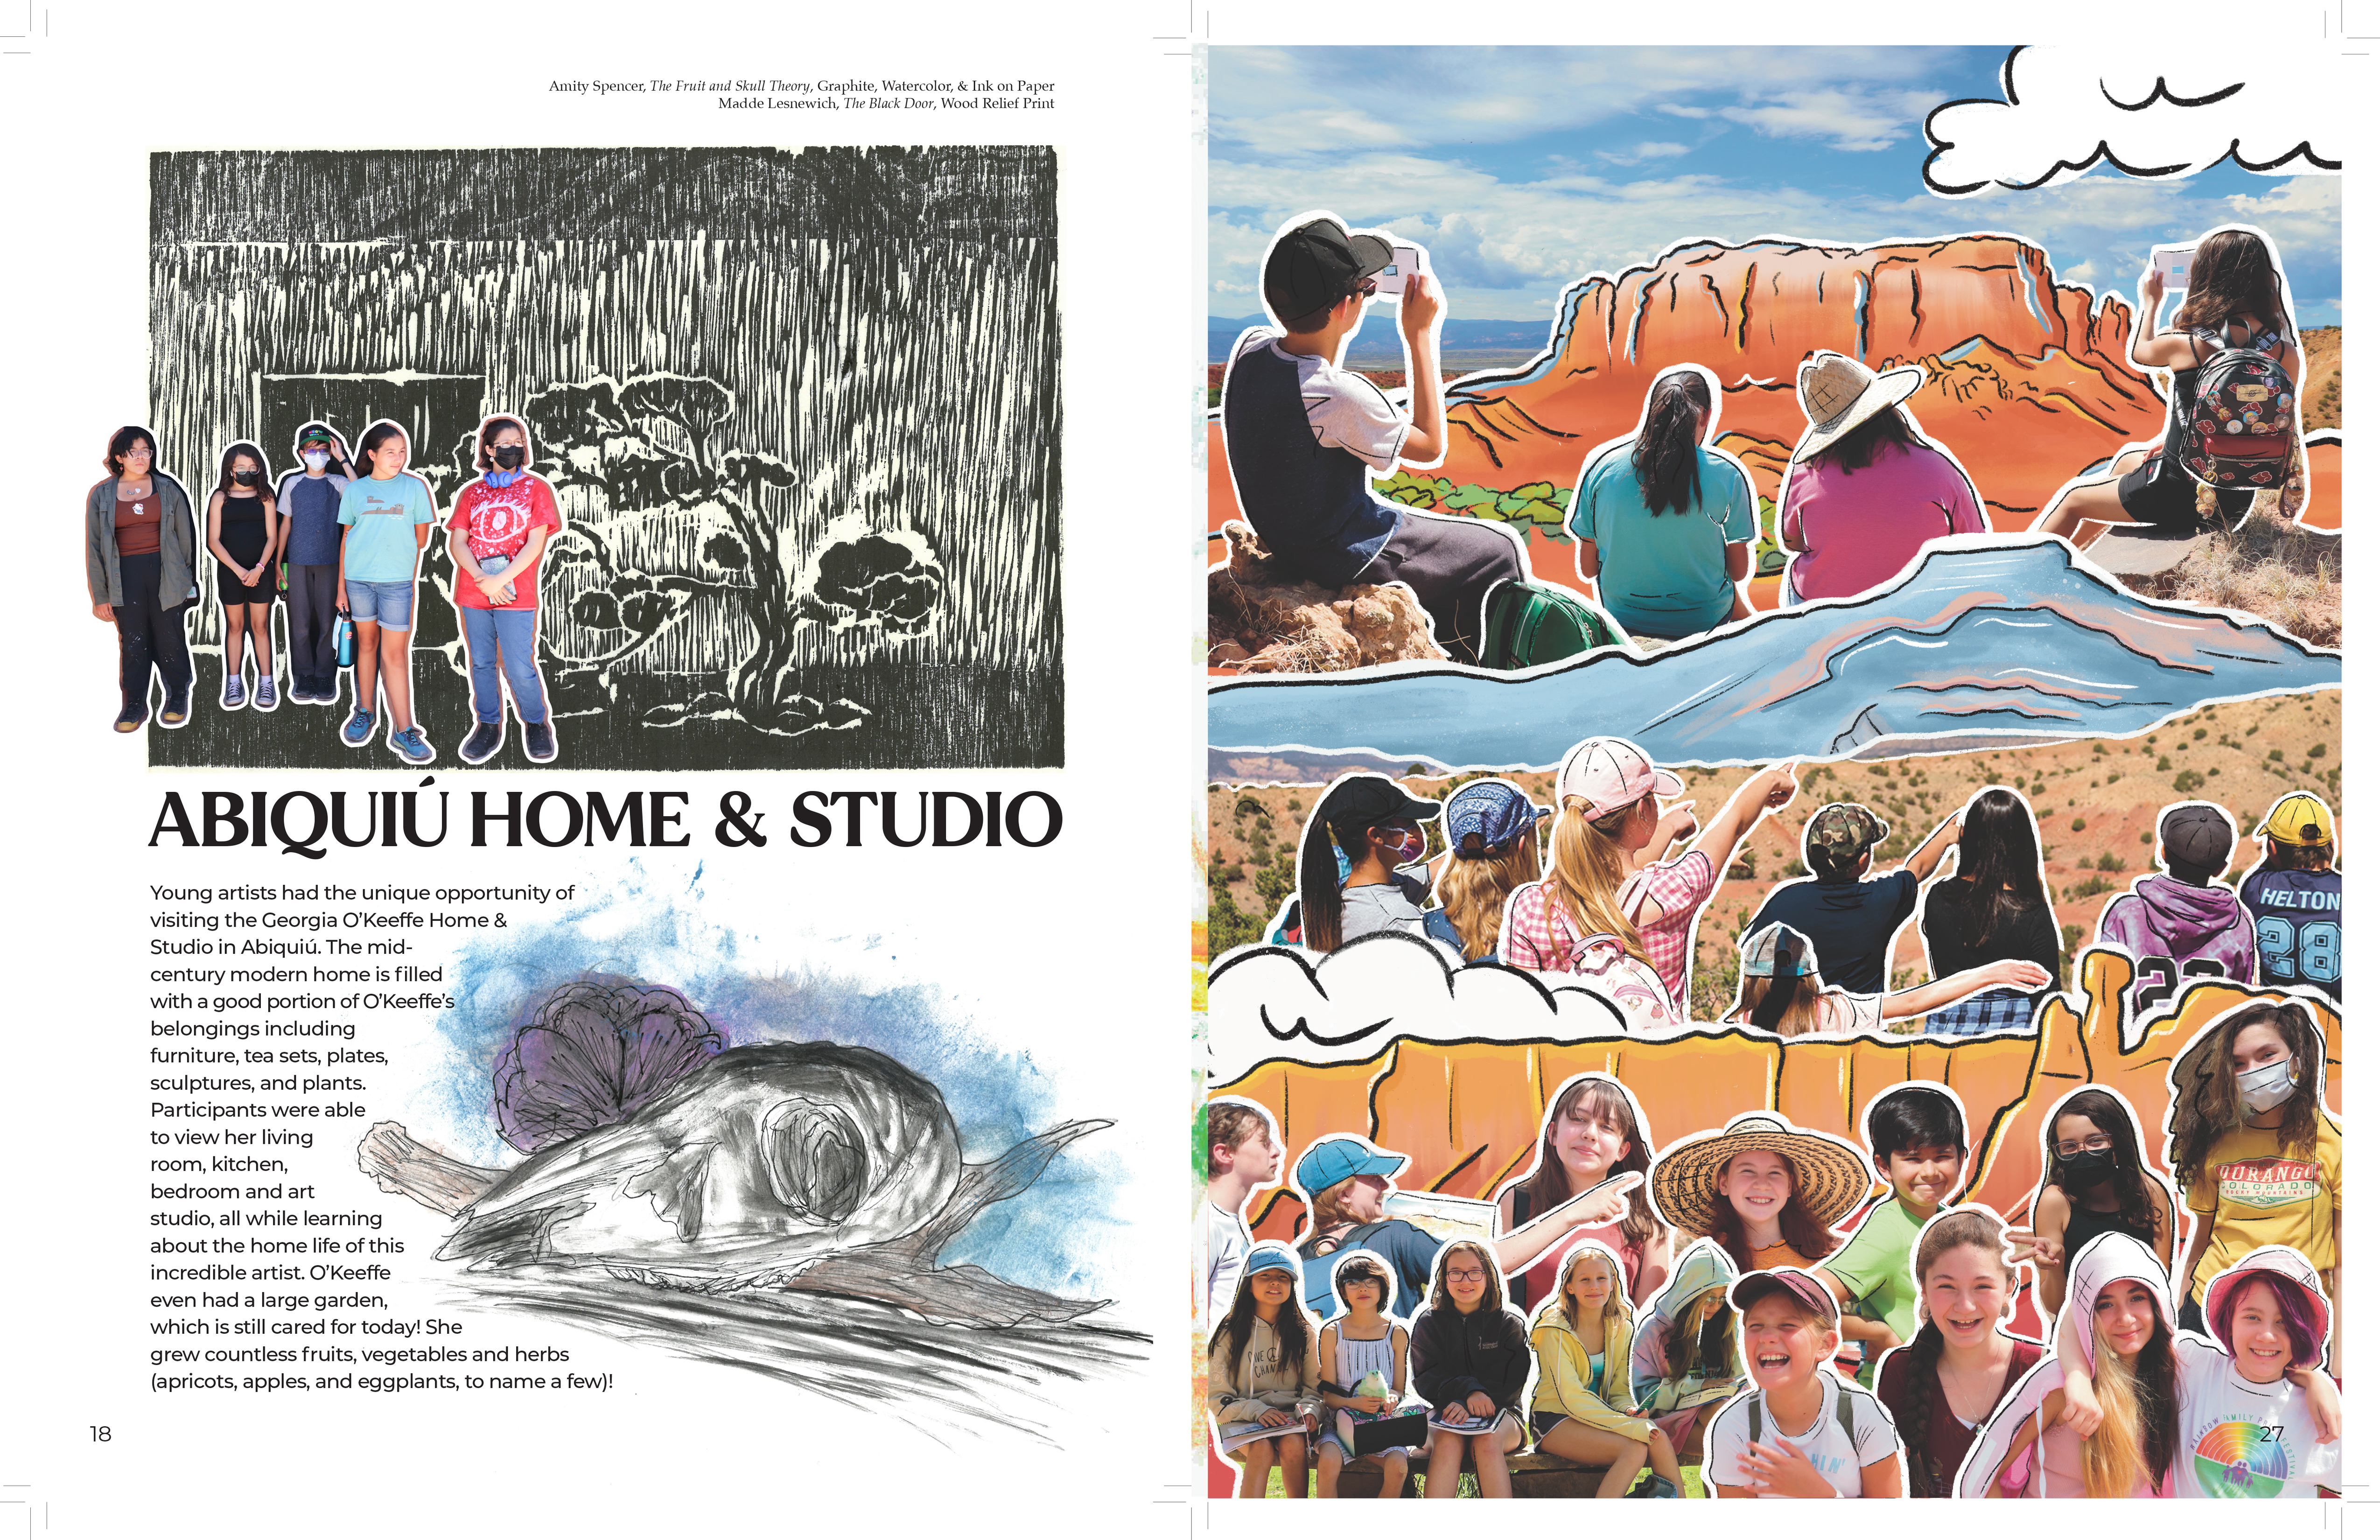 Pages from the zine showing photos from the students' visit to O'Keeffe home and studio in Abiquiú and Ghost Ranch. Between the photos are illustrations by the students.